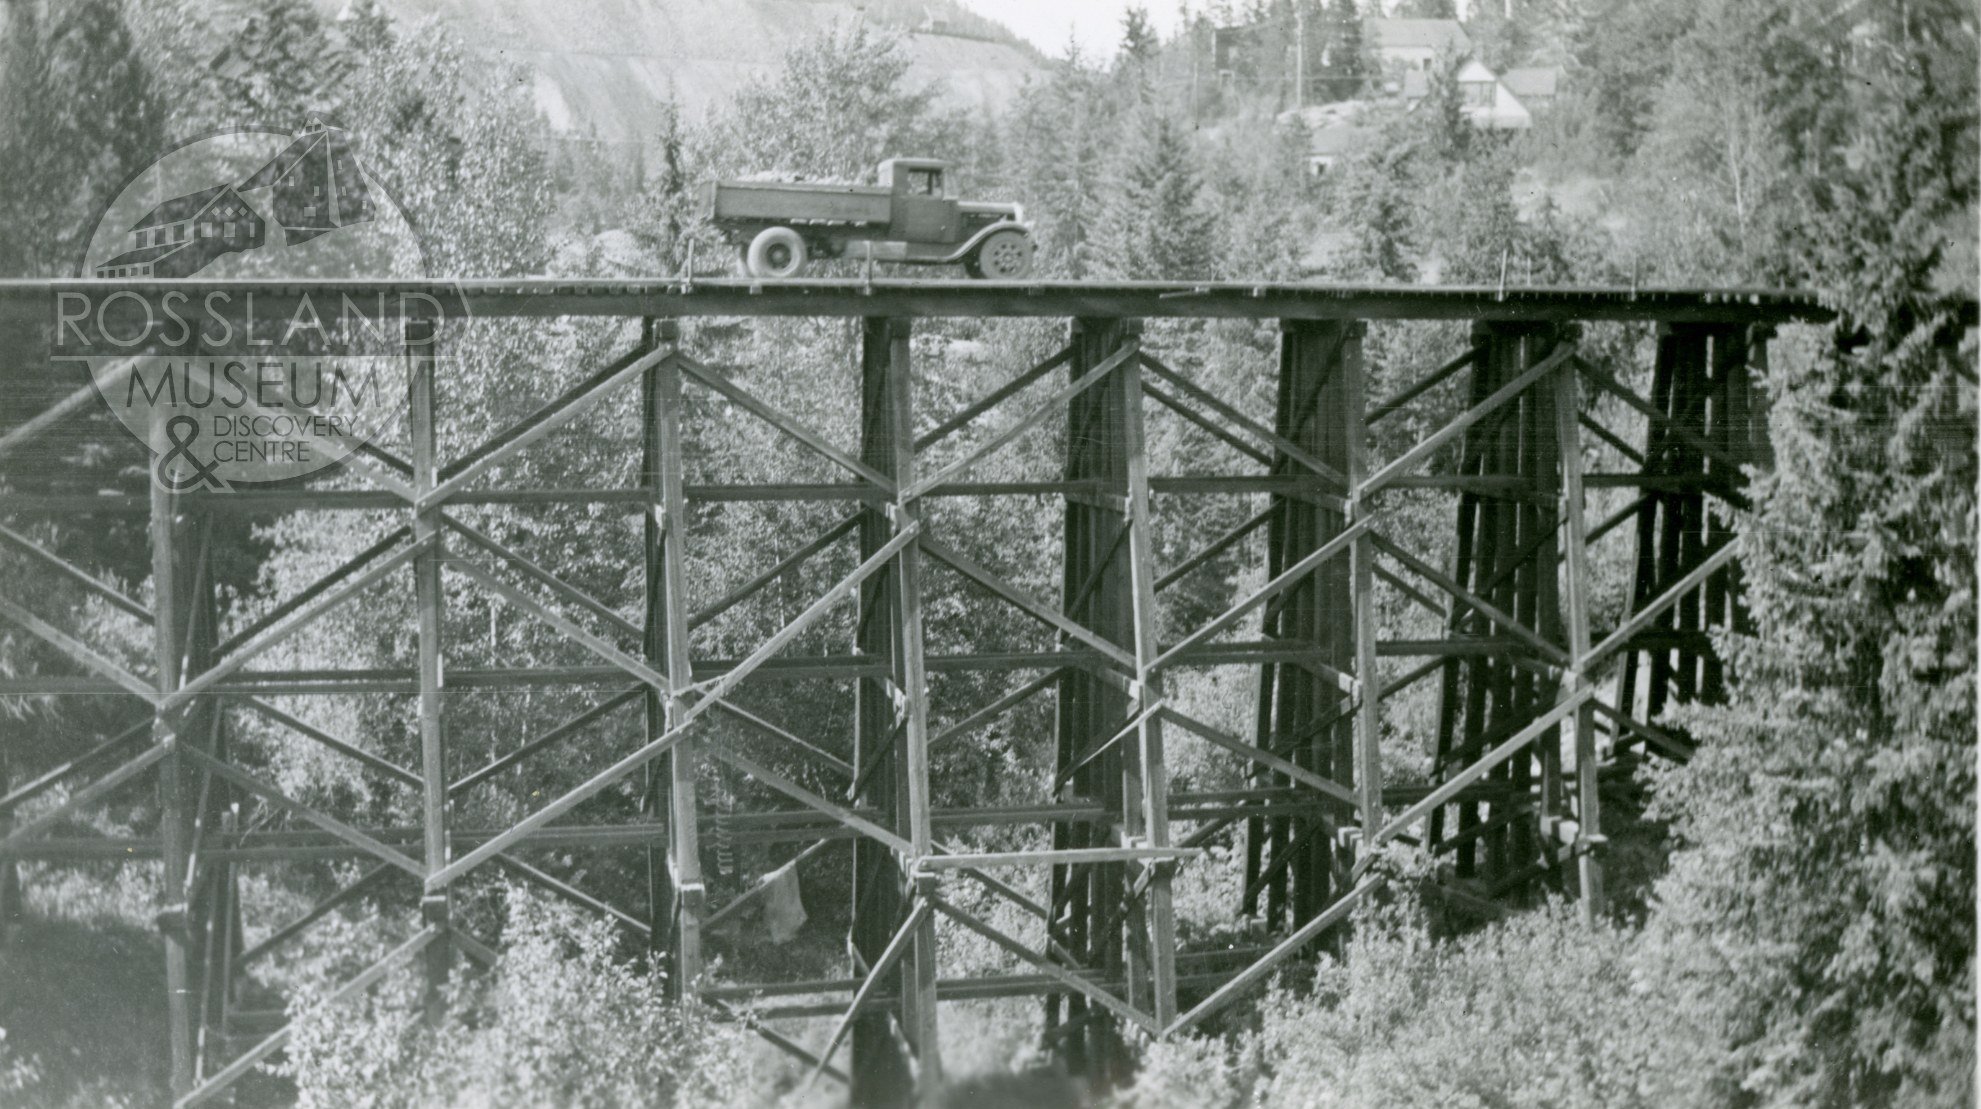 Did you know that Rossland's railways often utilized trestle bridges like this one? Wooden trestle bridges would be built on-site from locally-sourced materials to connect railroad routes over gaps or creeks. In this photo from the McDonald family co